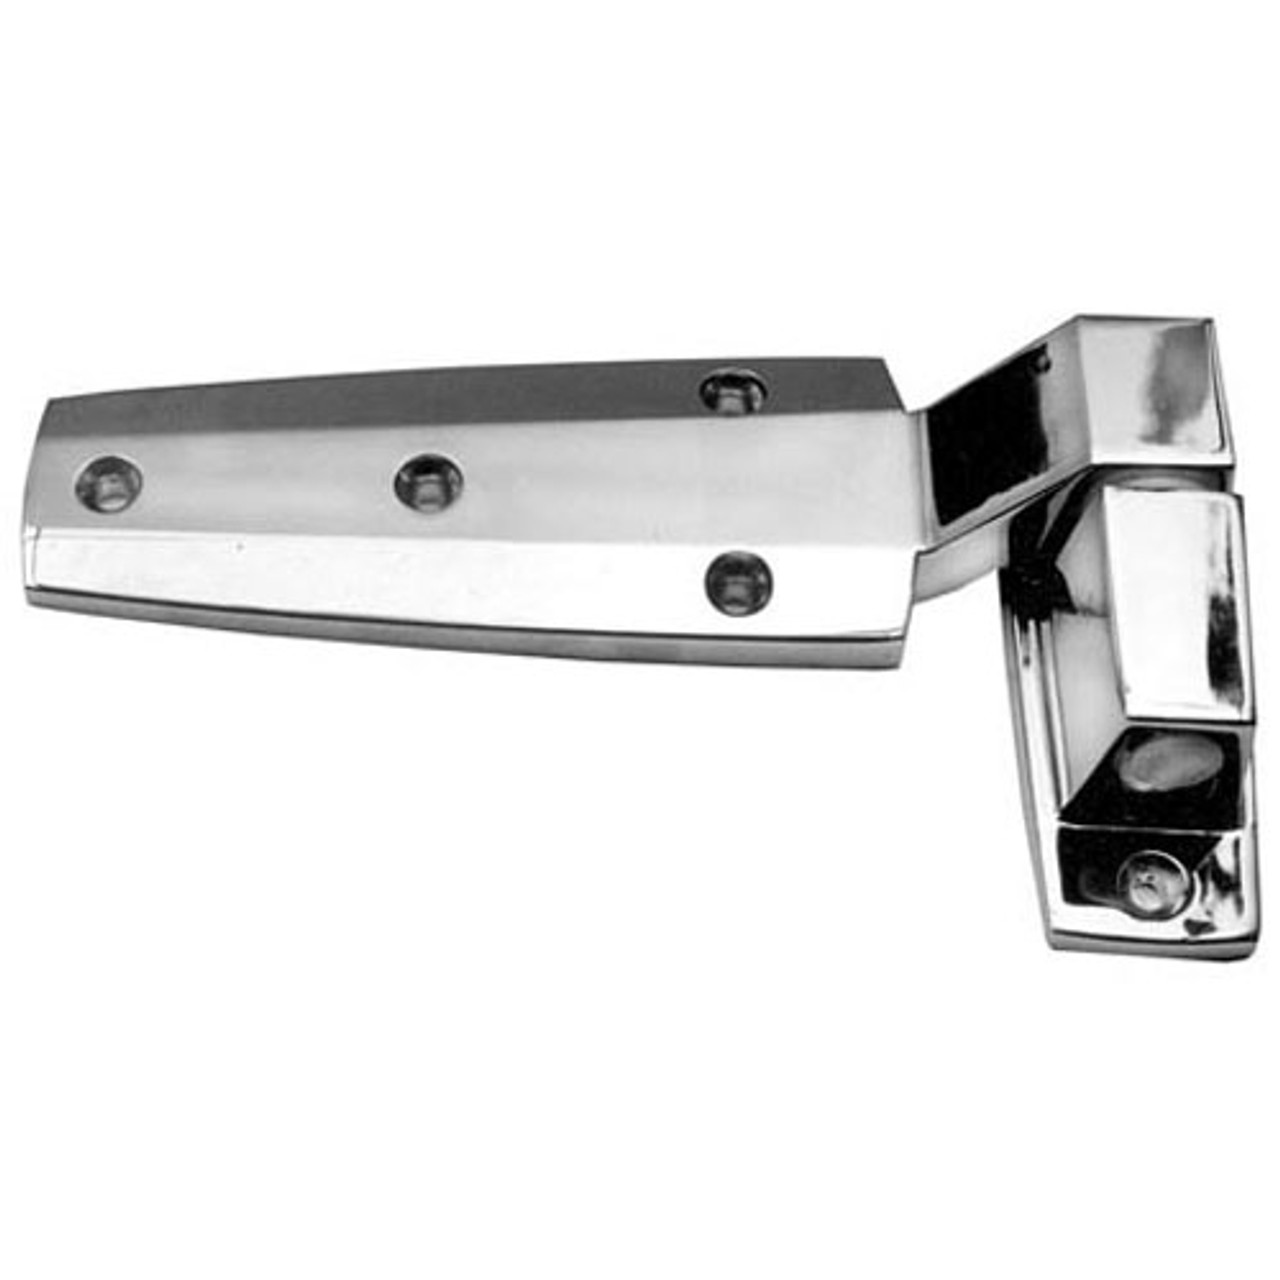 1 1/8 In Offset Hinge Self-Closing, Chg W60 - Replacement Part For Standard Keil 2860-1209-1110